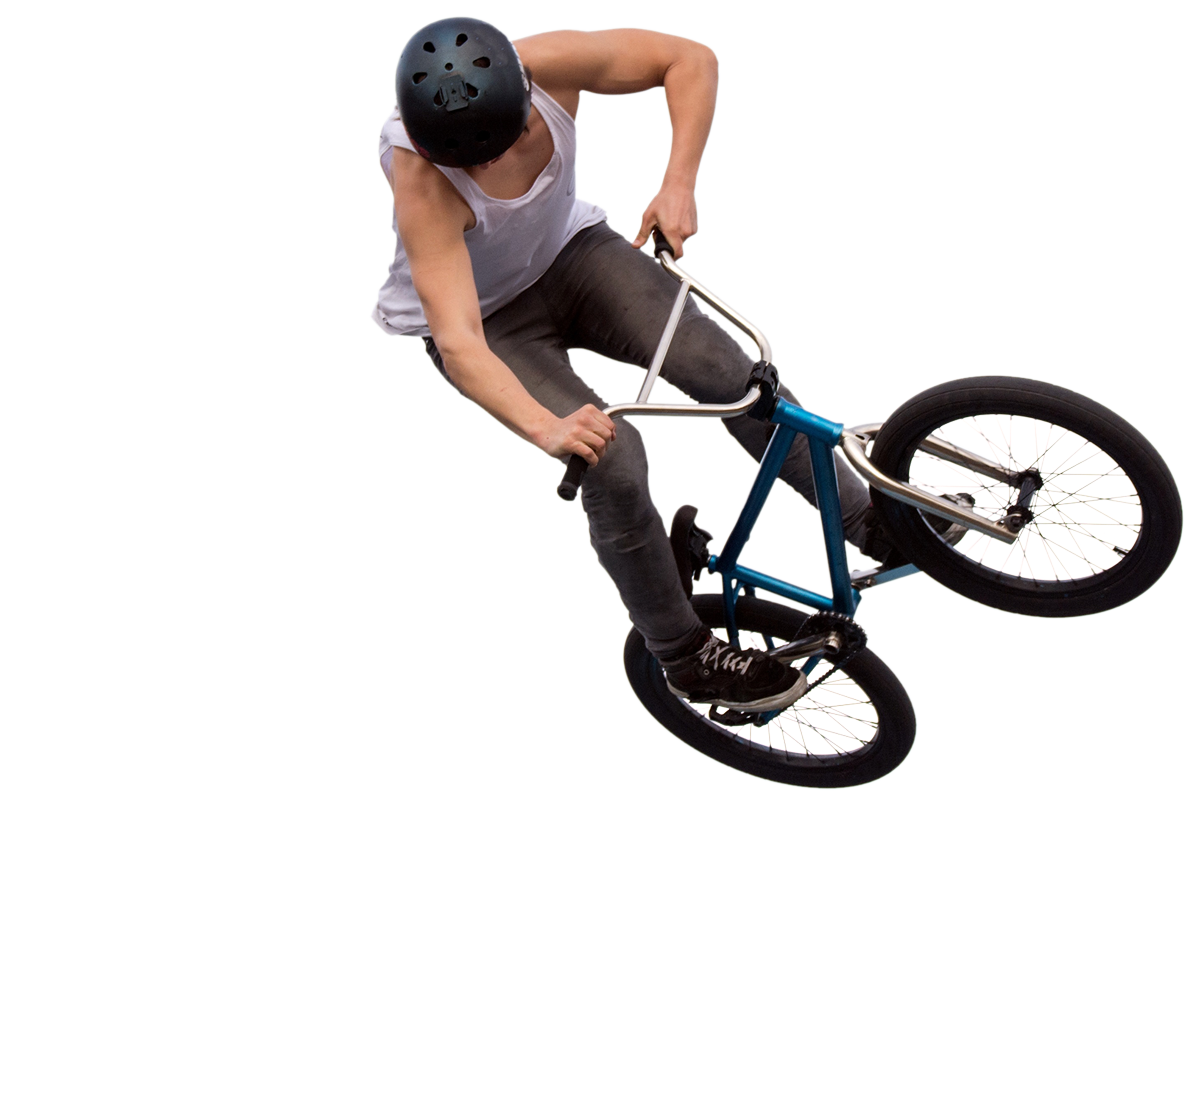 executing a brands touchpoints can feel like your flying like this BMX rider